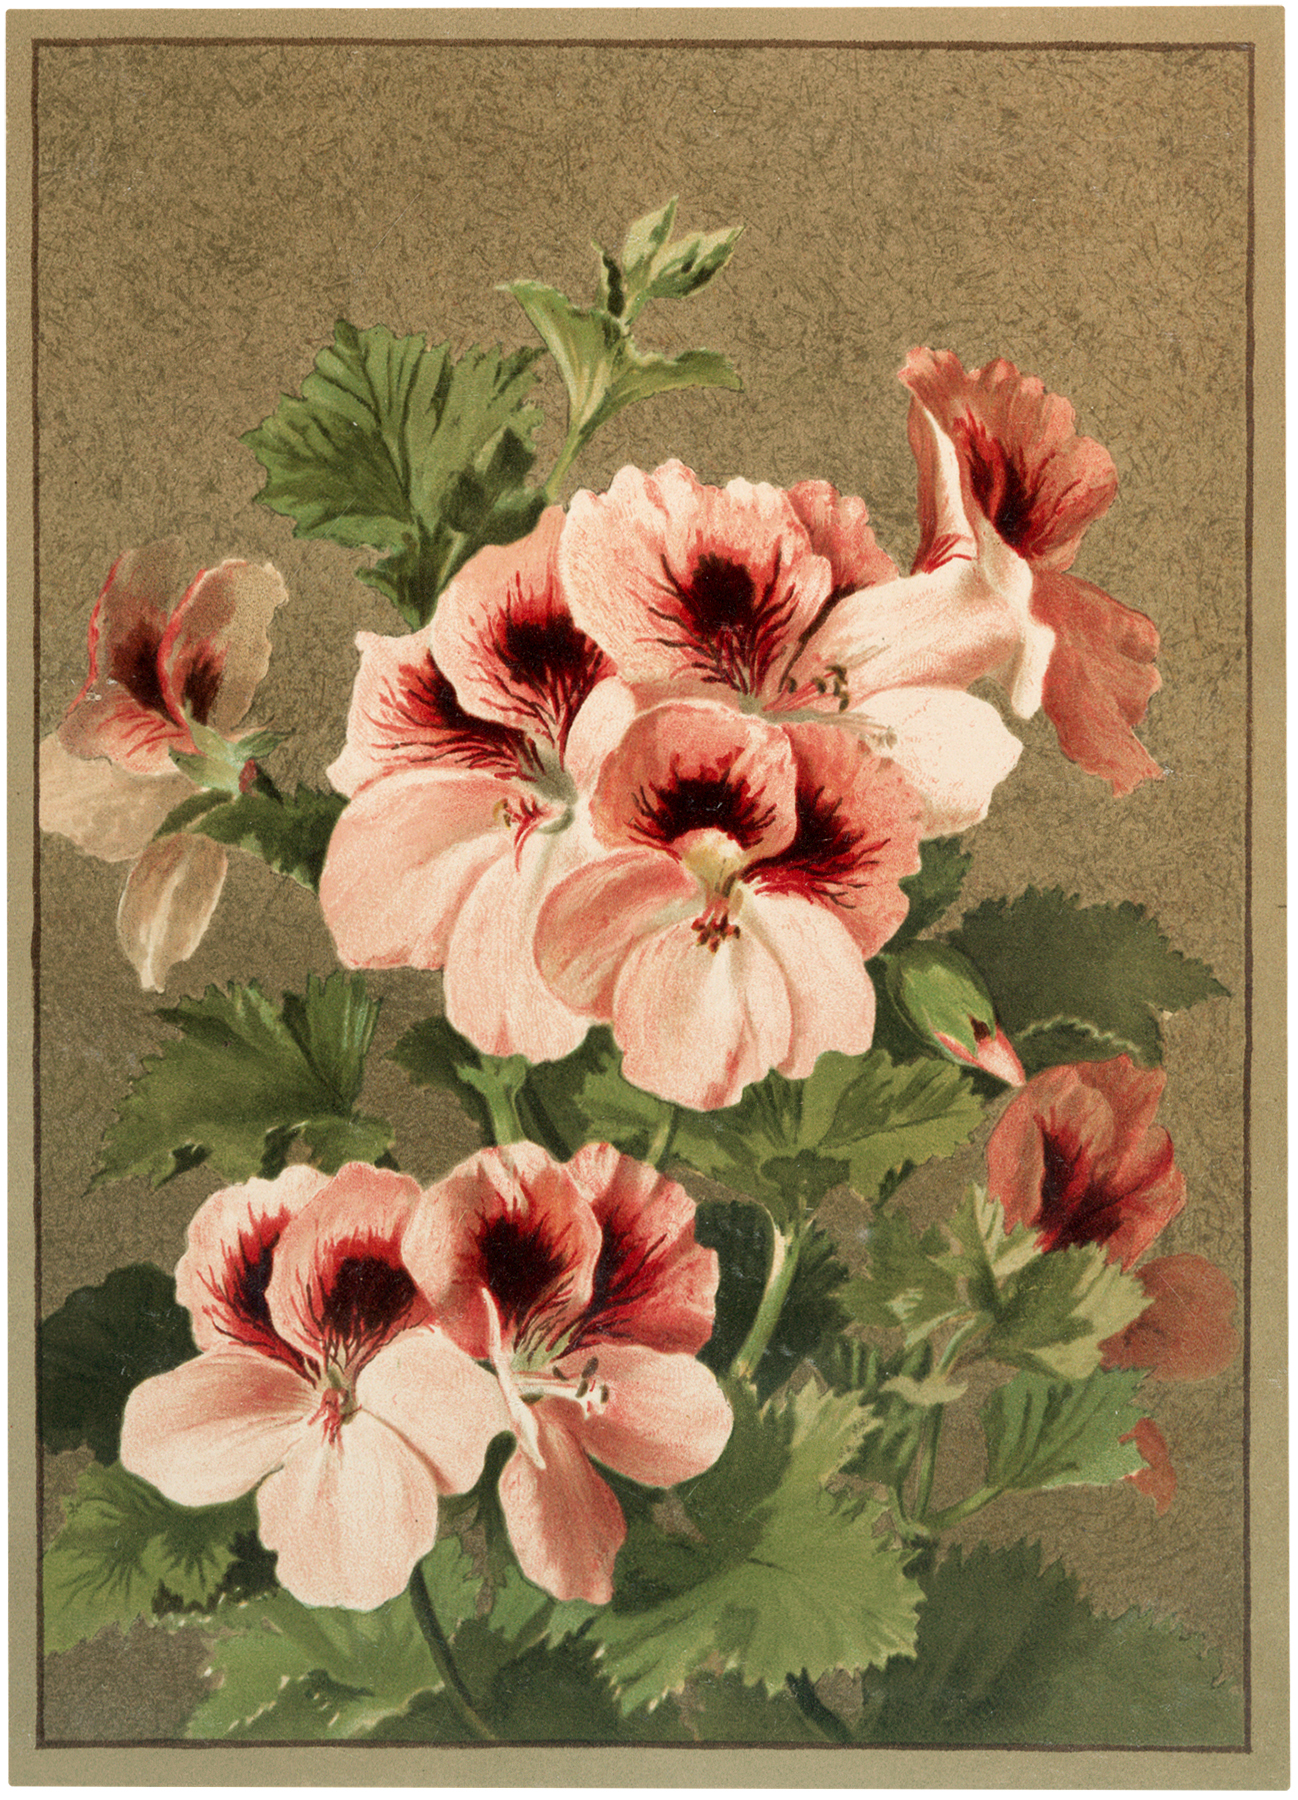 vintage-pink-flowers-image-the-graphics-fairy